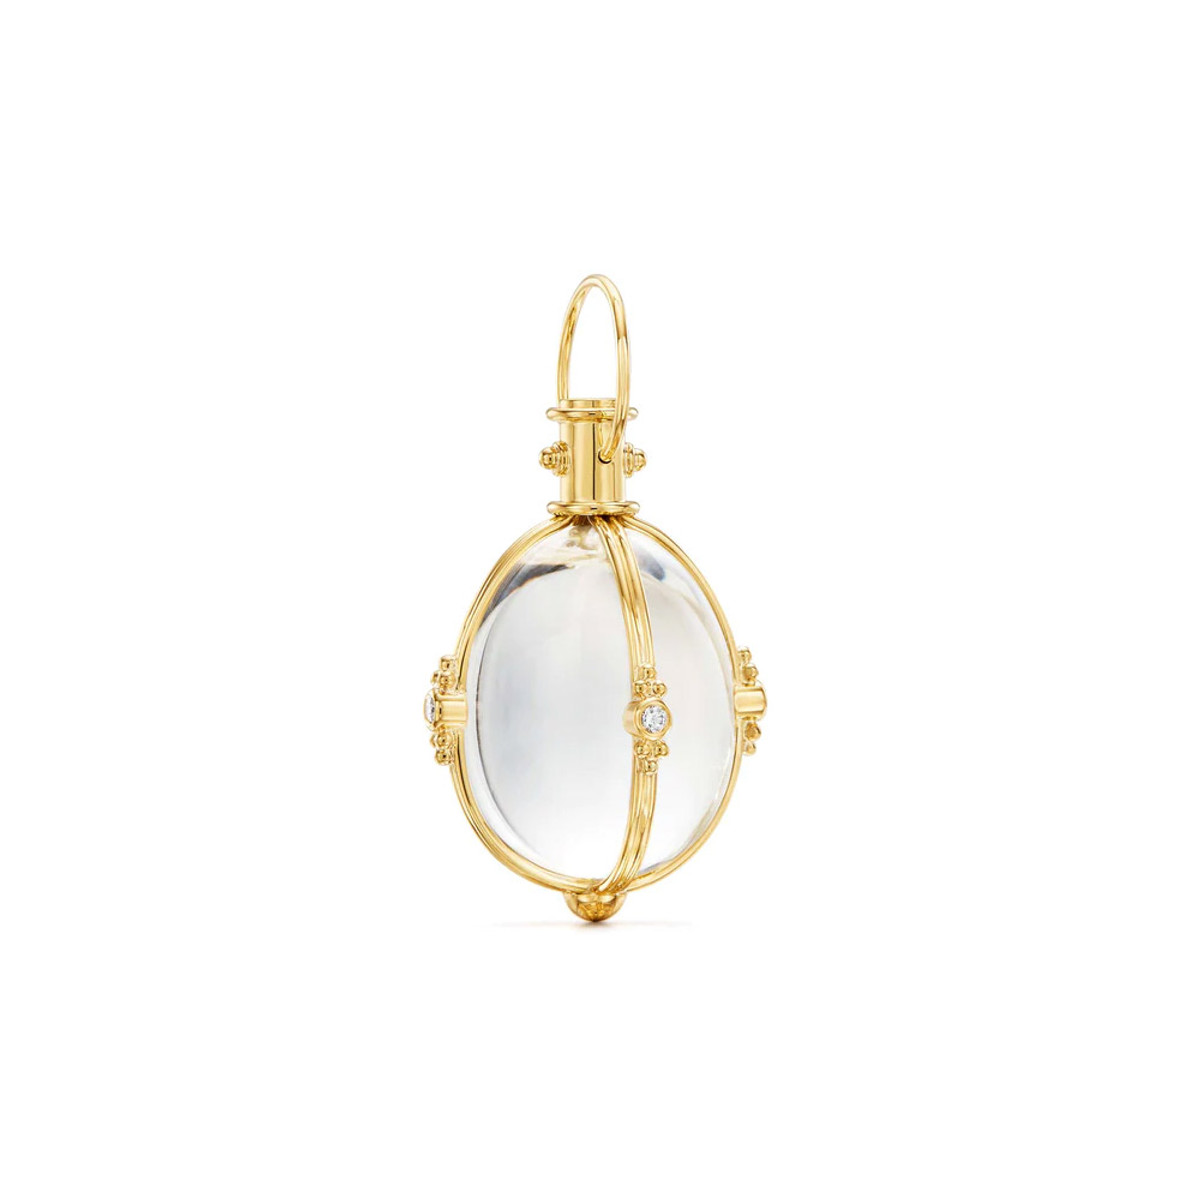 Temple St. Clair 18K Yellow Gold Diamond Classic Amulet-61270 Product Image